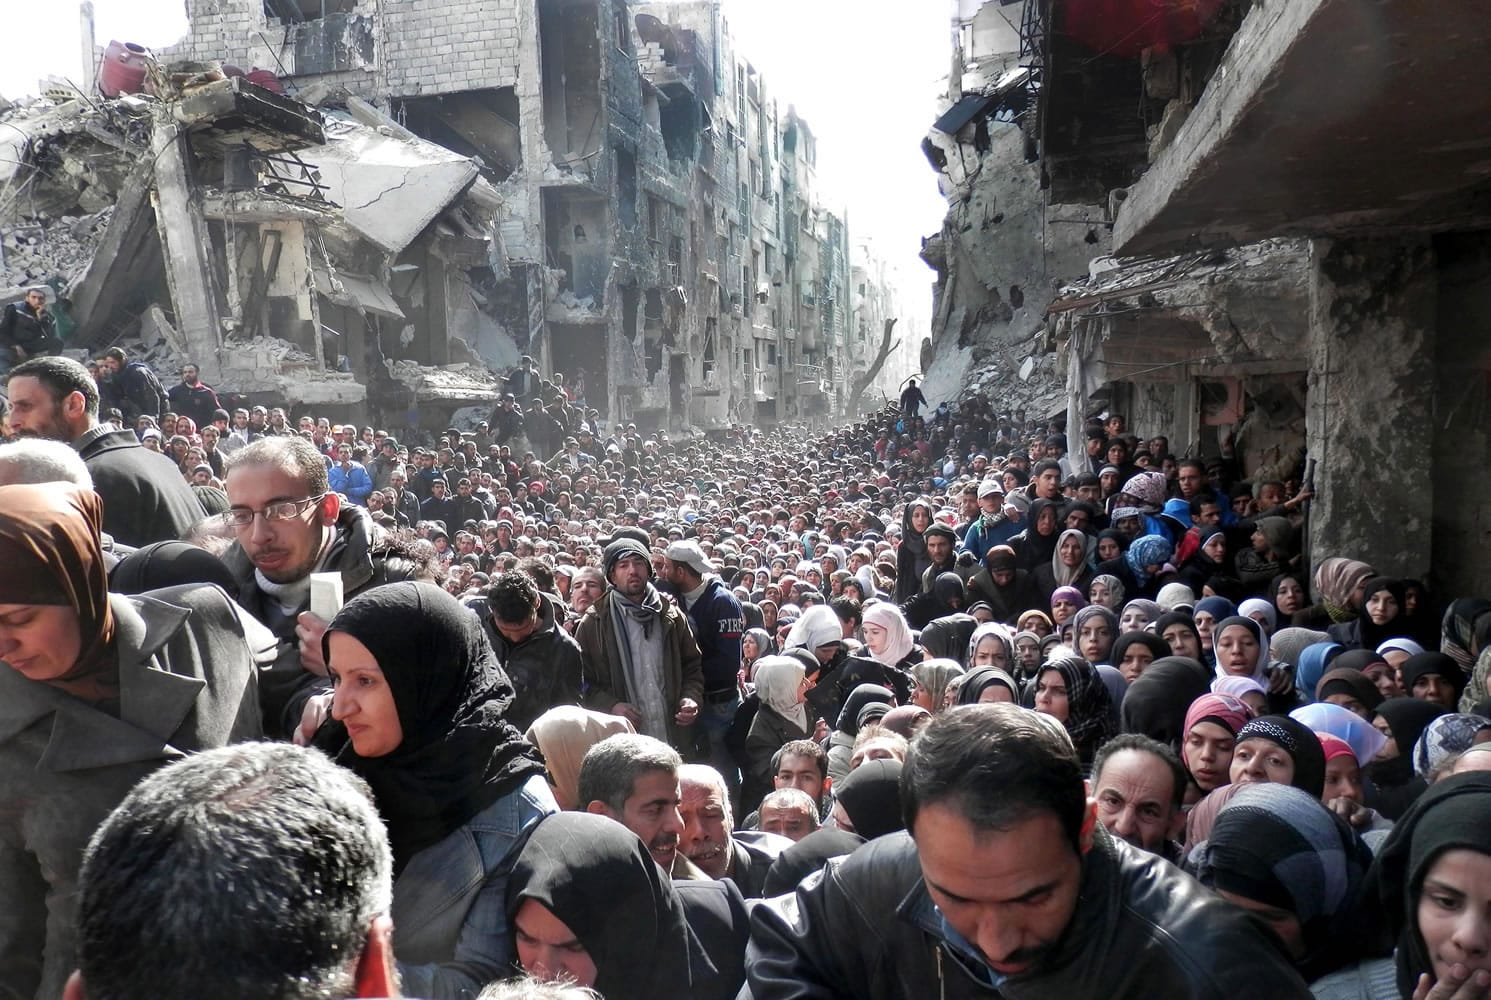 FILE - In this Jan. 31, 2014 file photo released by the United Nations Relief and Works Agency for Palestine Refugees in the Near East (UNRWA), shows residents of the besieged Palestinian camp of Yarmouk, queuing to receive food supplies, in Damascus, Syria. That year, the U.N.